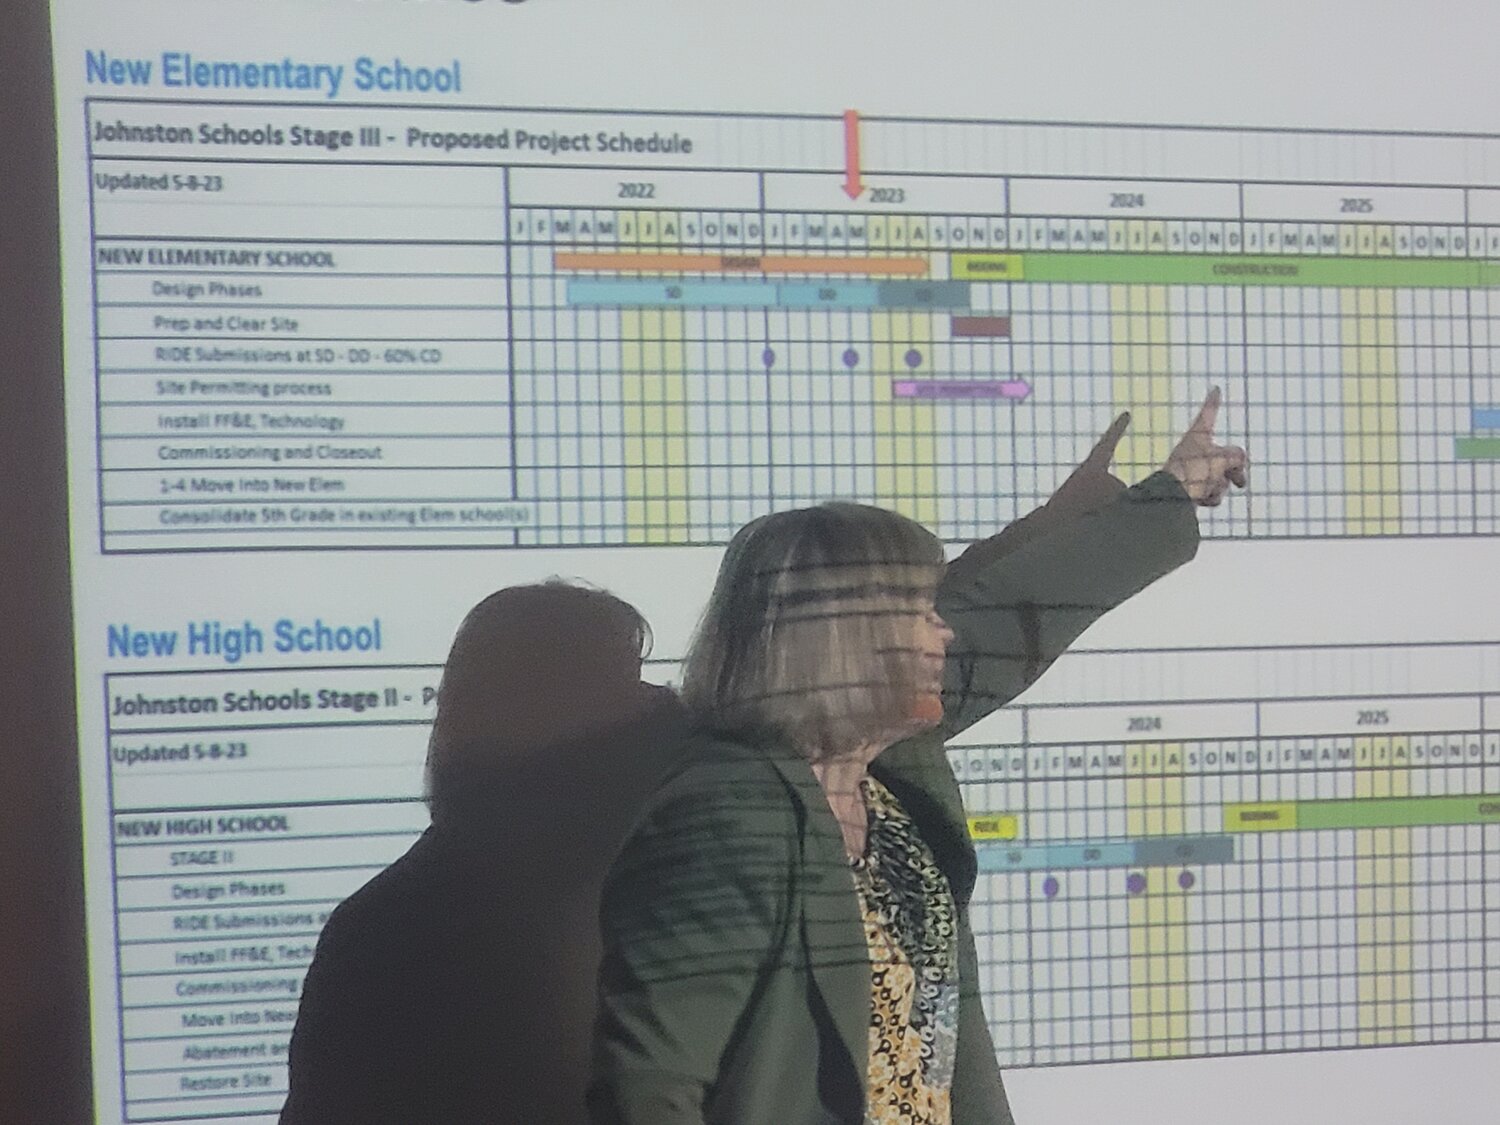 NEW JHS: Cathie Ellithorpe, Principal of the SLAM Collaborative, unveils the earliest timeline plans for the planned new Johnston High School and Elementary School.